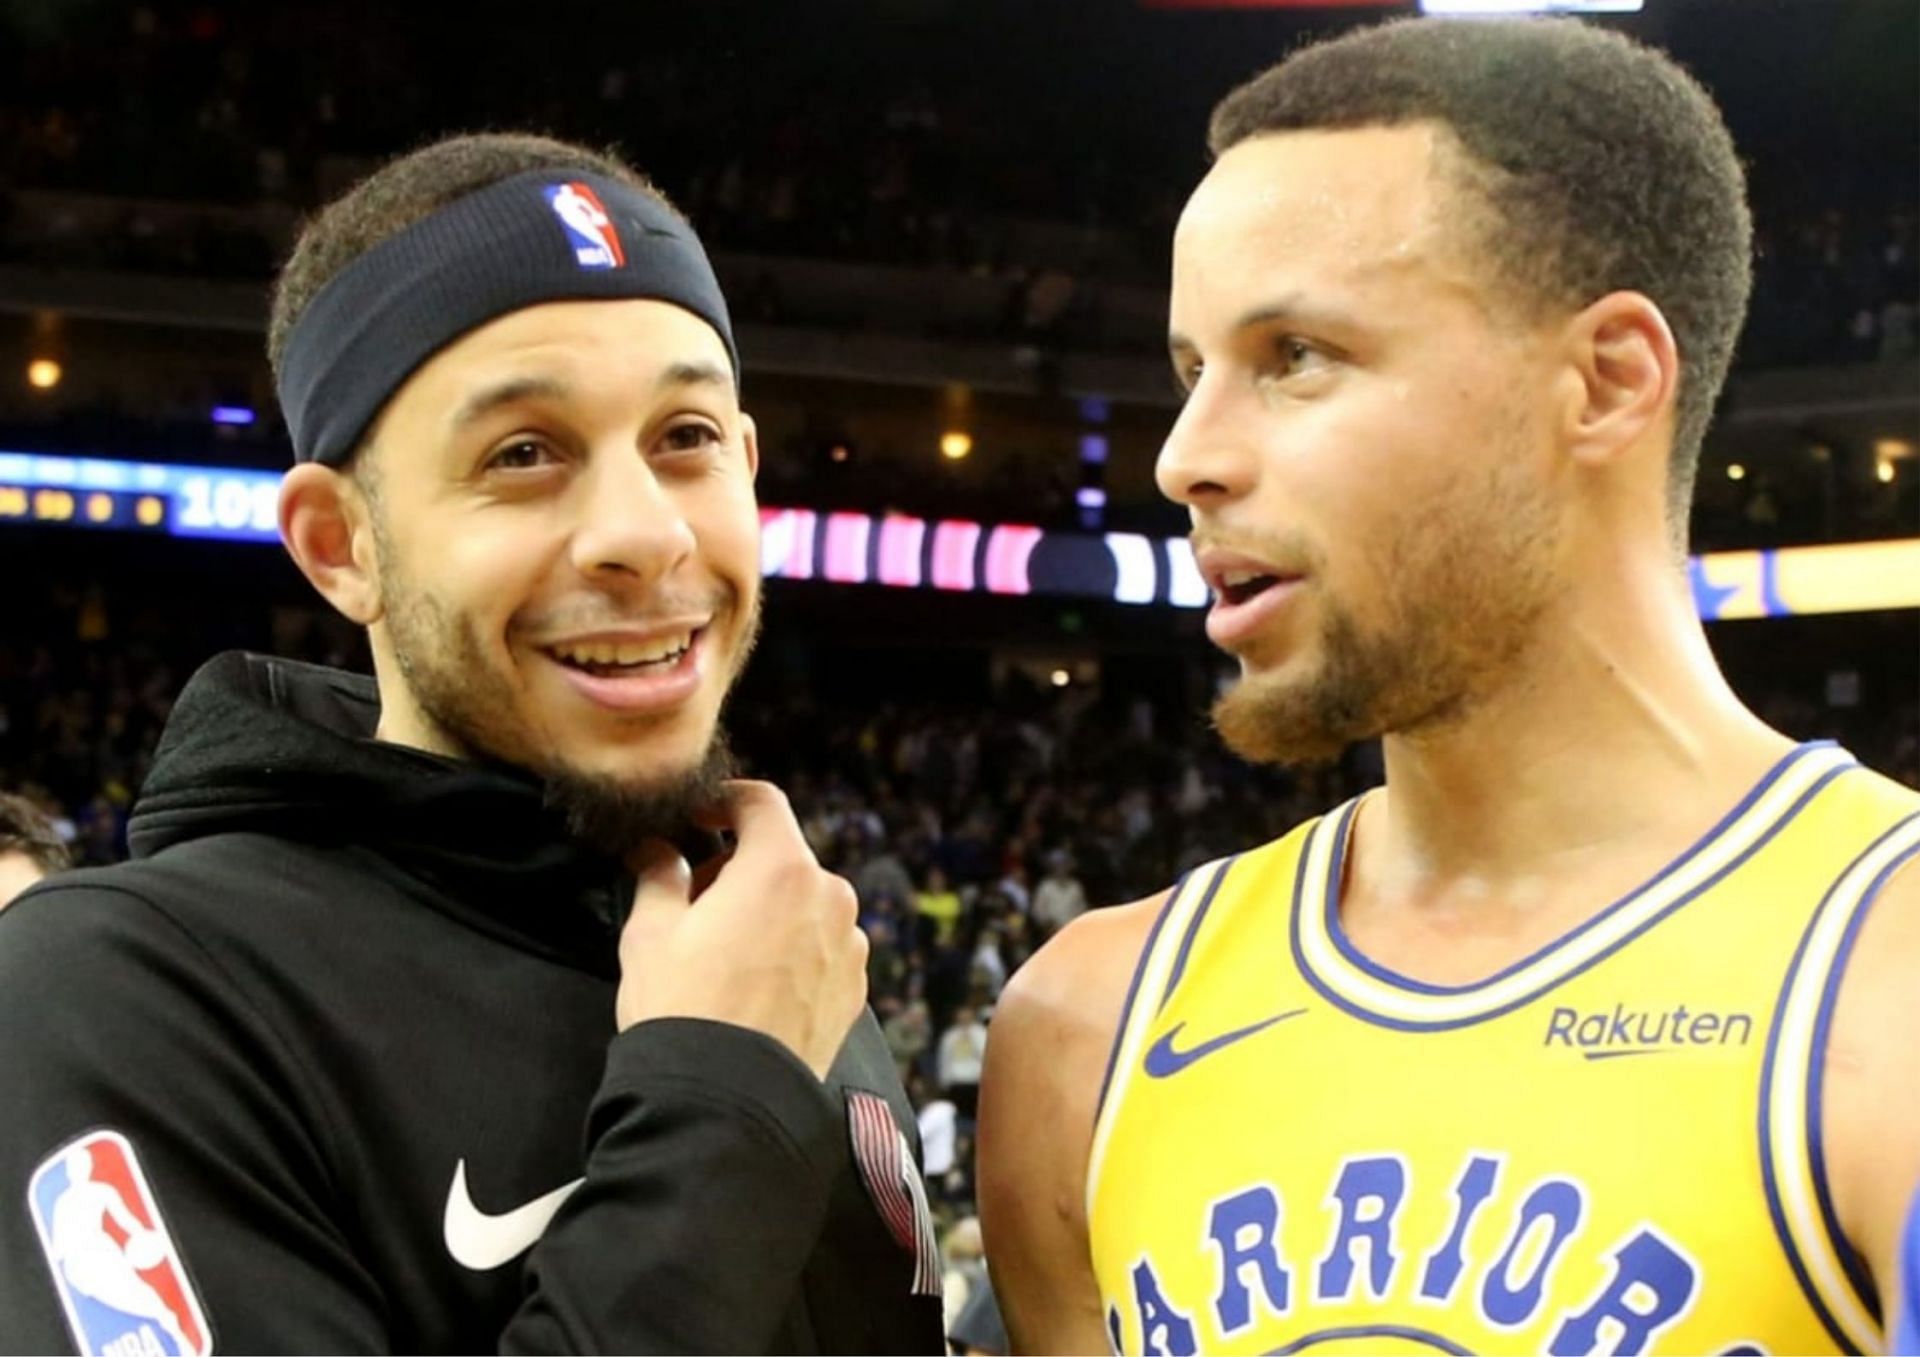 Steph Curry and Seth Curry playing for the same team will be a sight basketball fans will love to see.